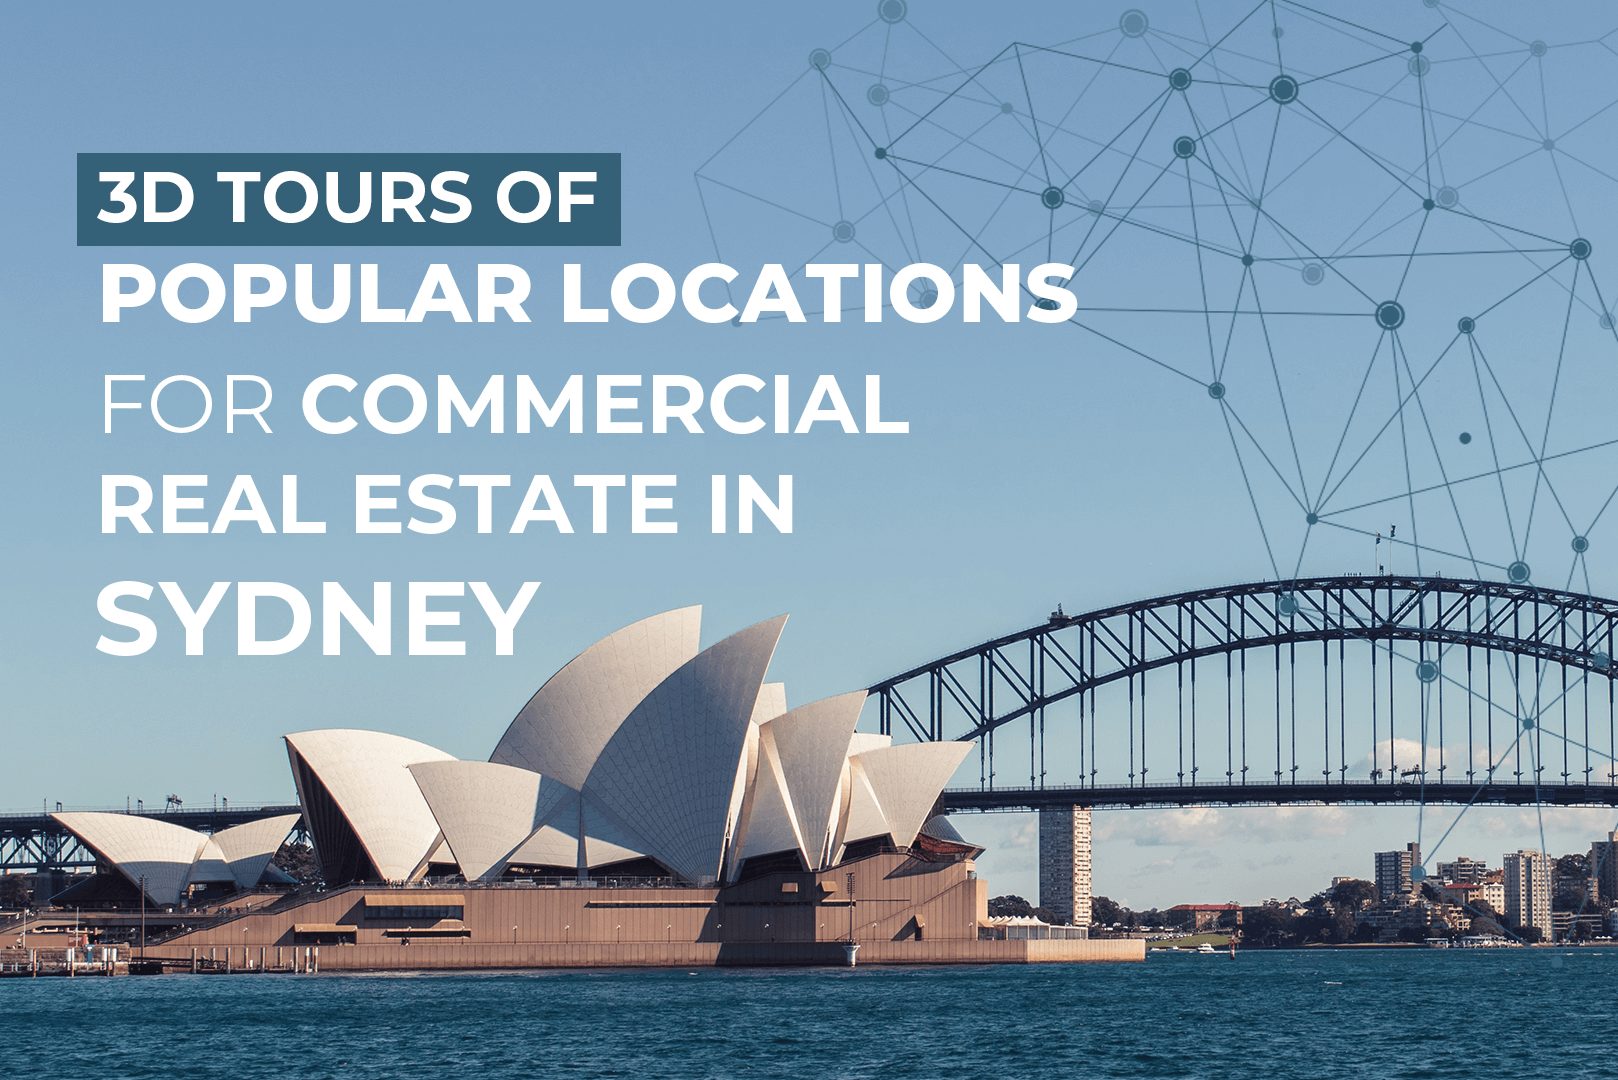 3D Tours Of Popular Locations For Commercial Real Estate In Sydney